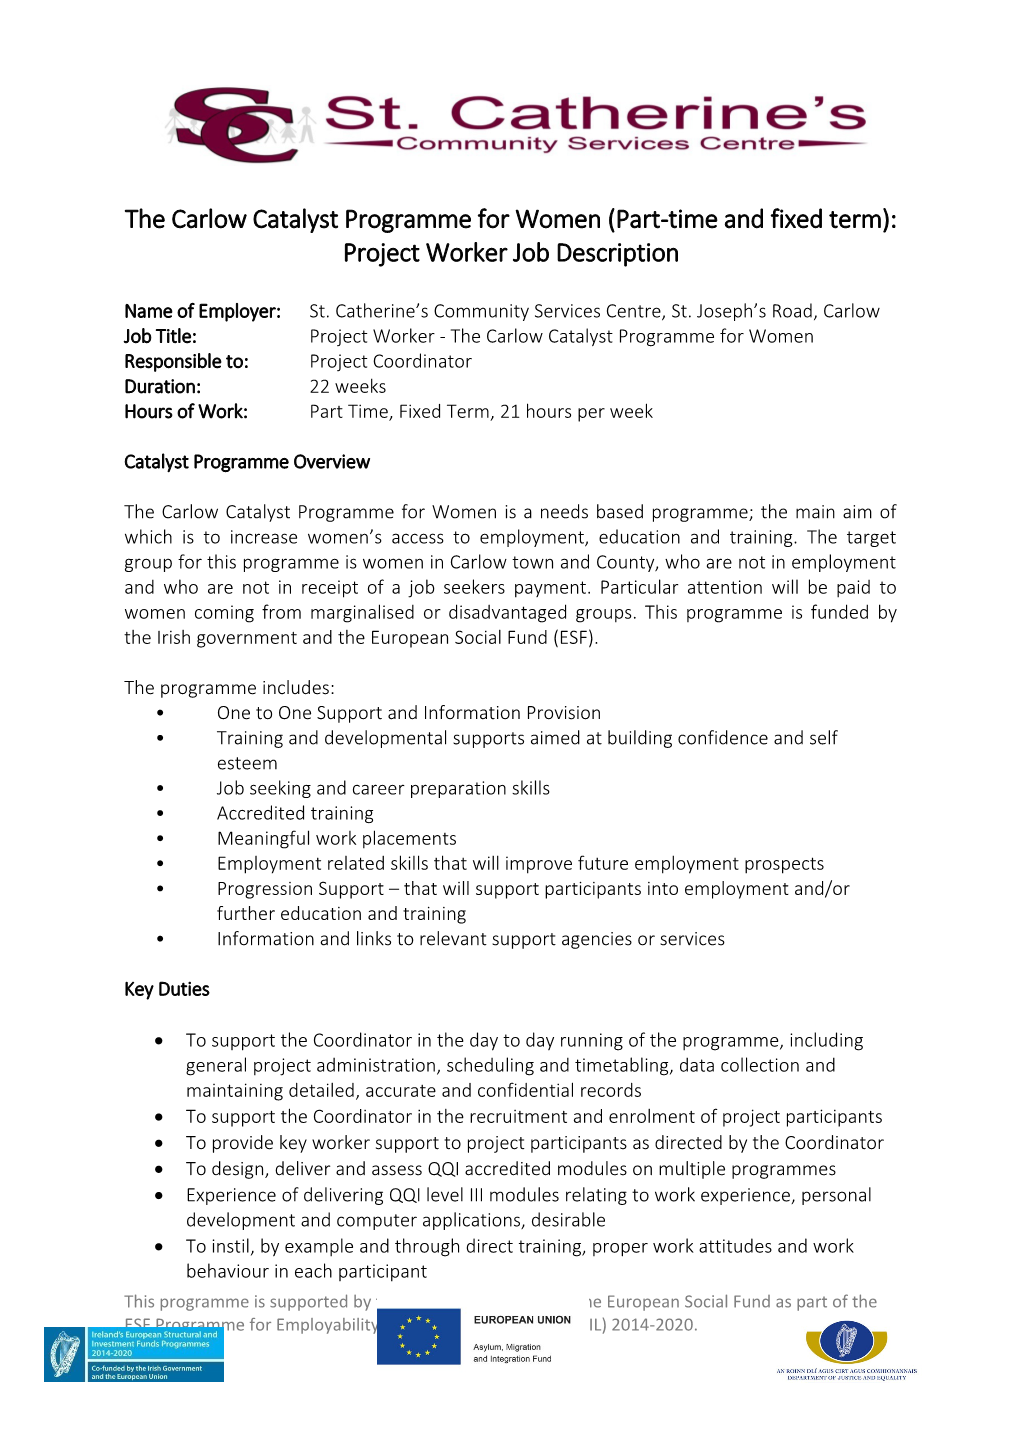 The Carlow Catalyst Programme for Women (Part-Time and Fixed Term): Project Worker Job